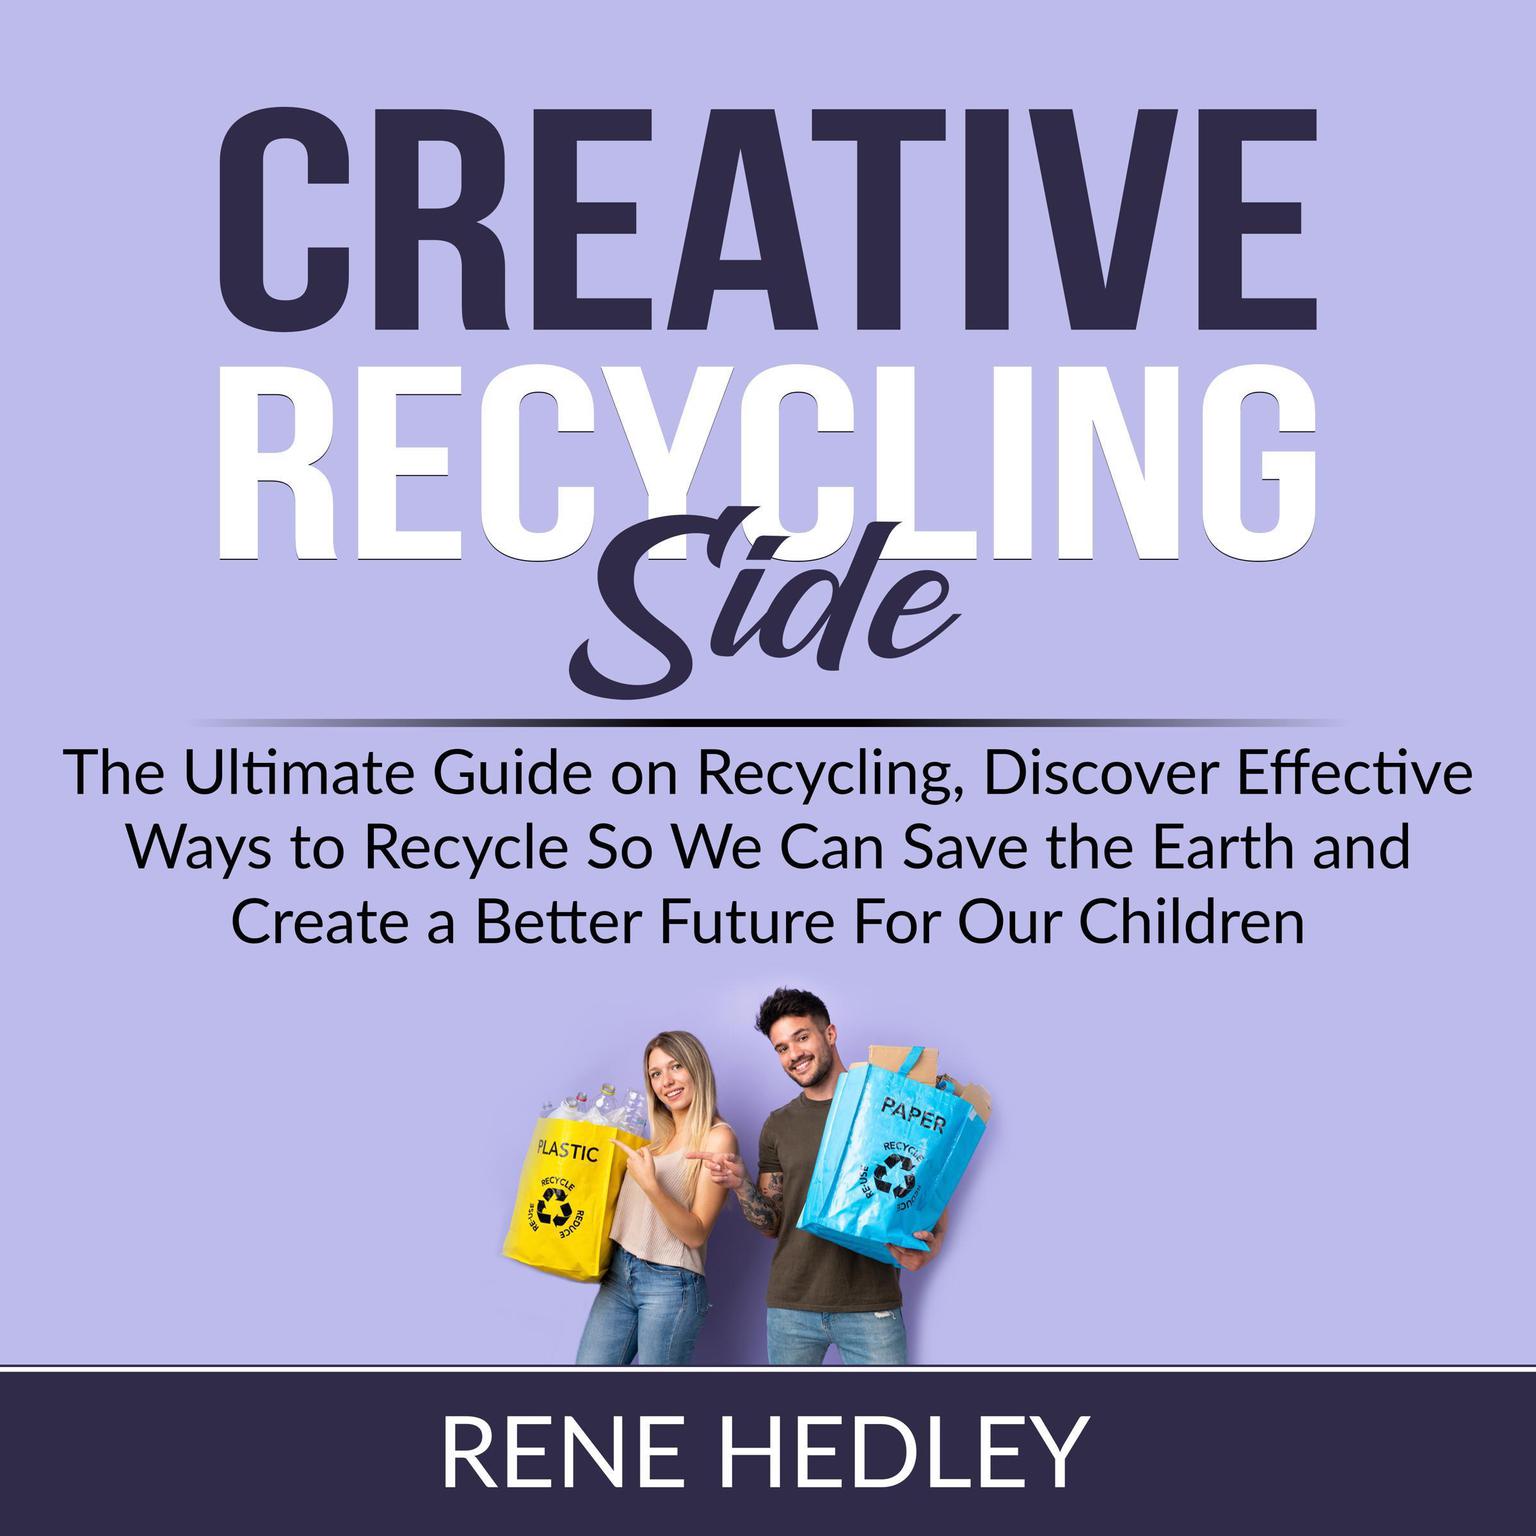 Creative Recycling Side: The Ultimate Guide on Recycling, Discover Effective Ways to Recycle So We Can Save the Earth and Create a Better Future For Our Children Audiobook, by Rene Hedley